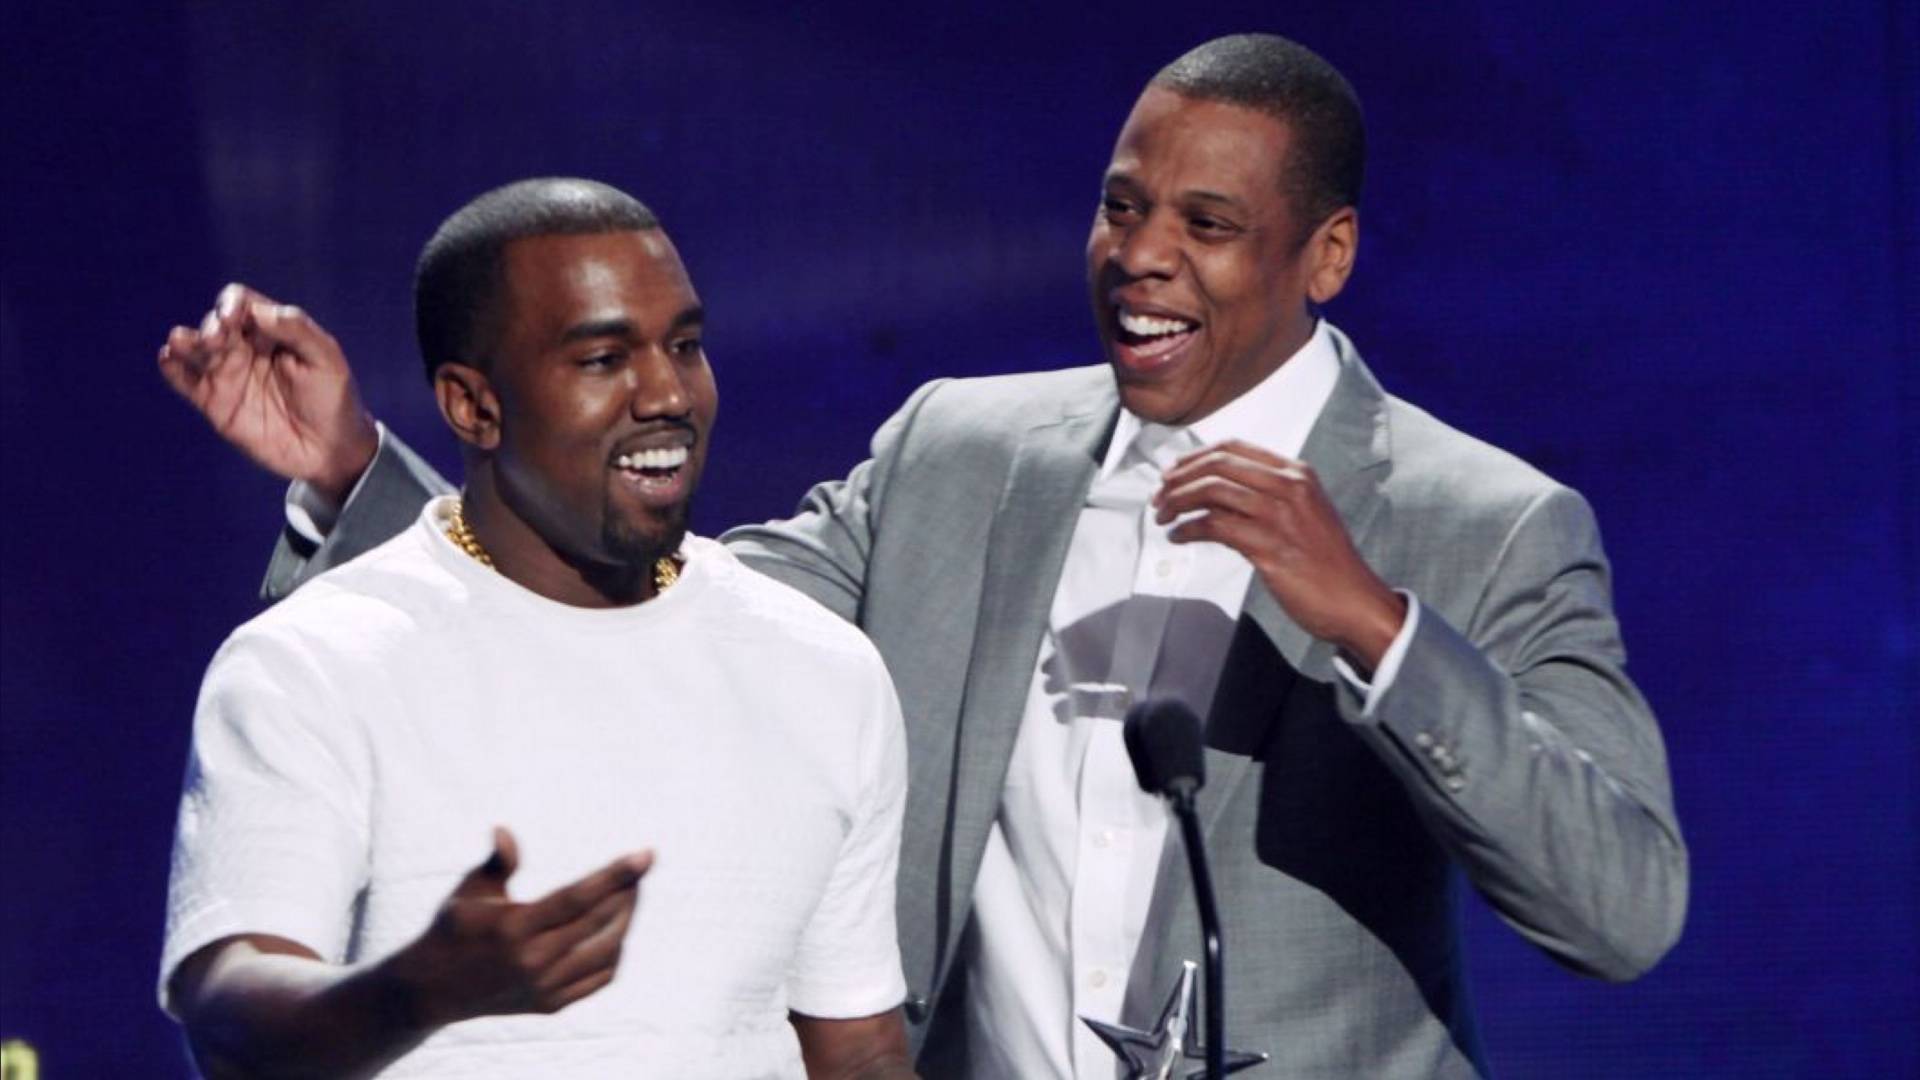 Kanye West and Jay-Z on BET Buzz 2020.